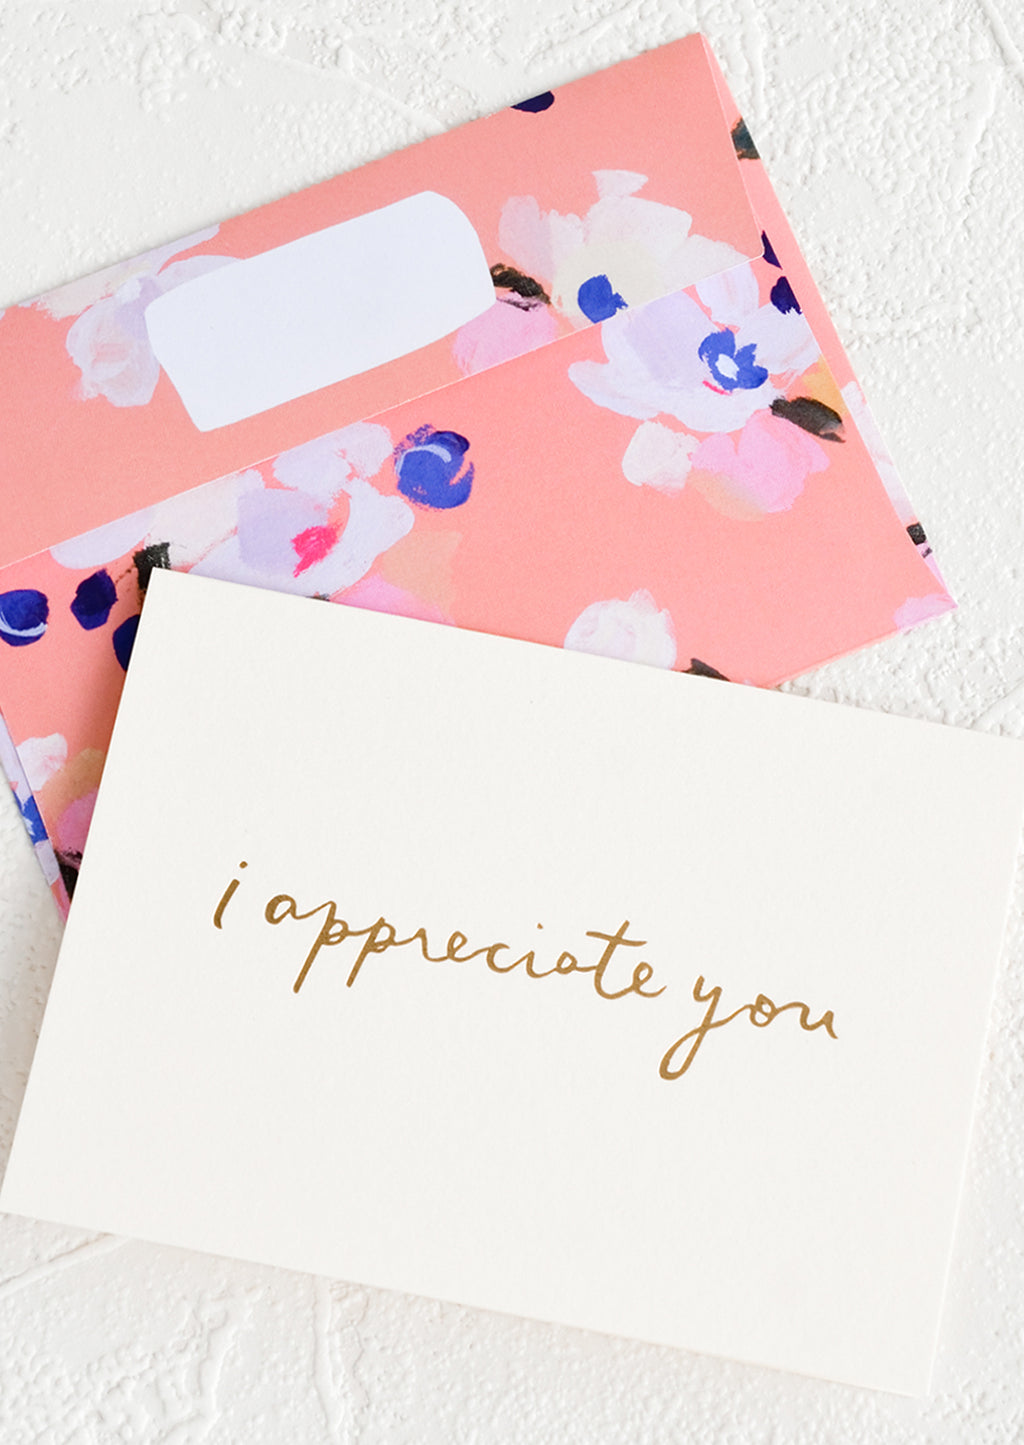 1: A white greeting card with golden cursive reading "I Appreciate You", paired with floral print envelope.